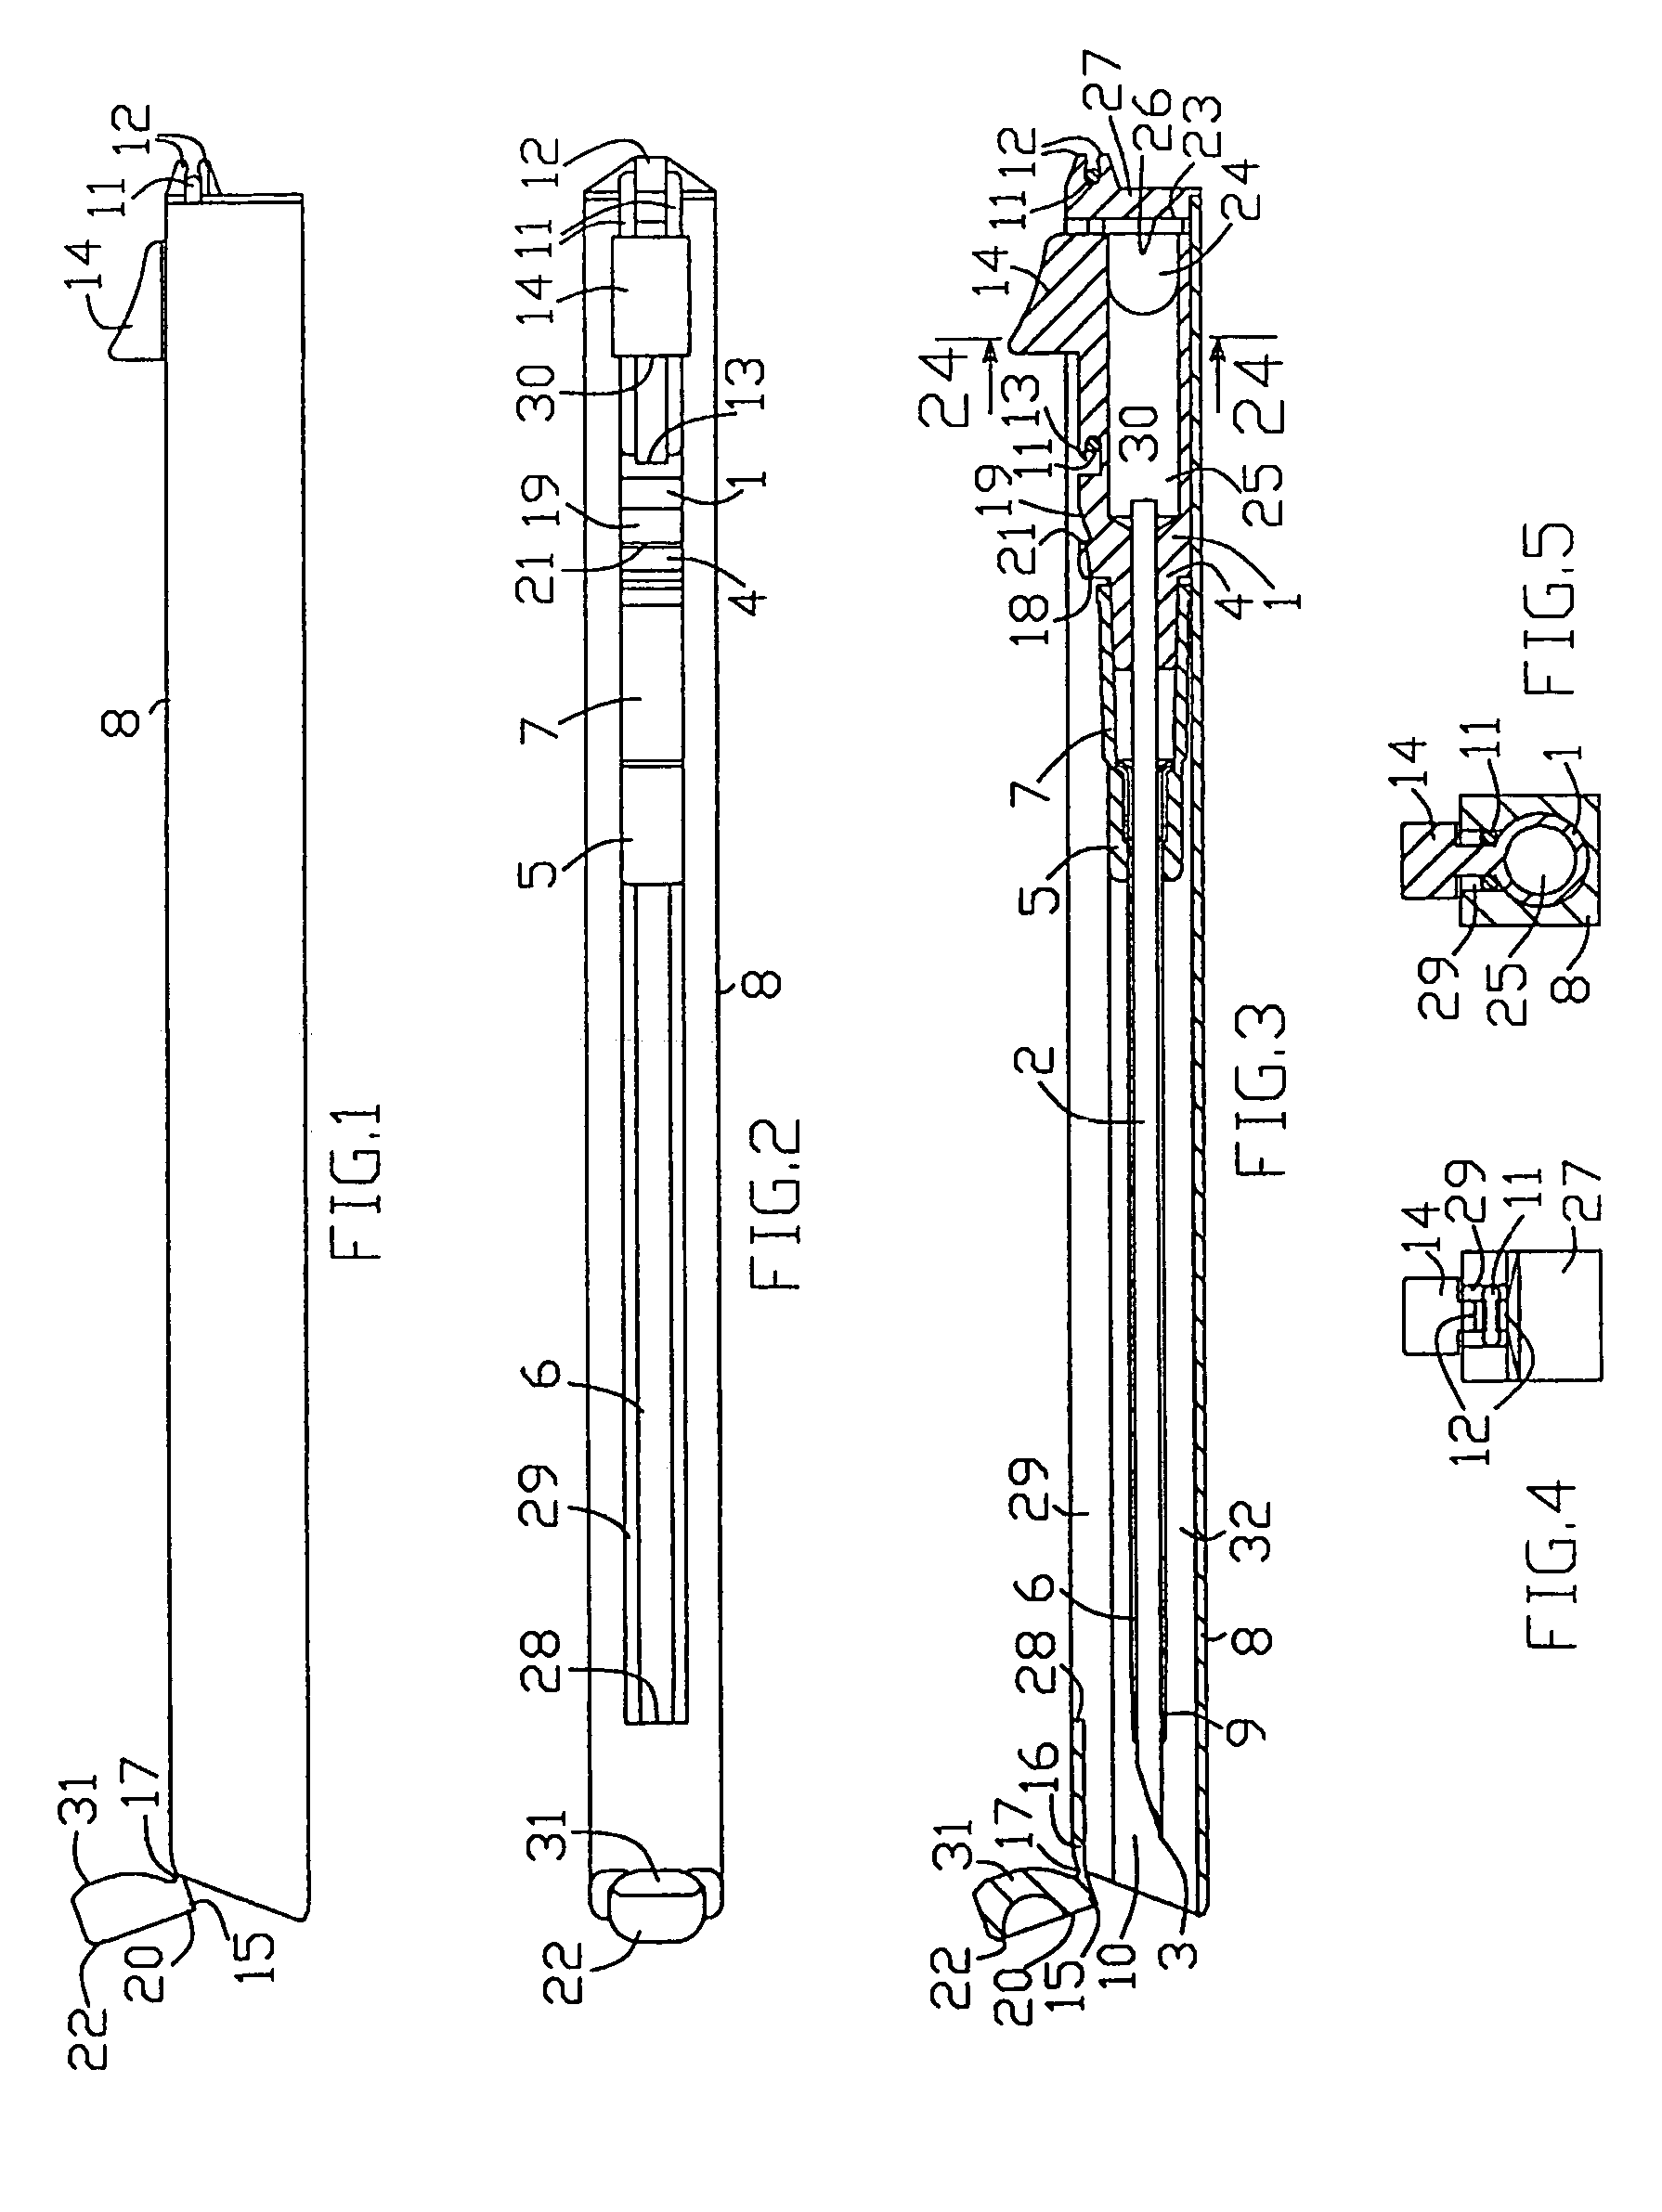 Compact catheter insertion apparatus